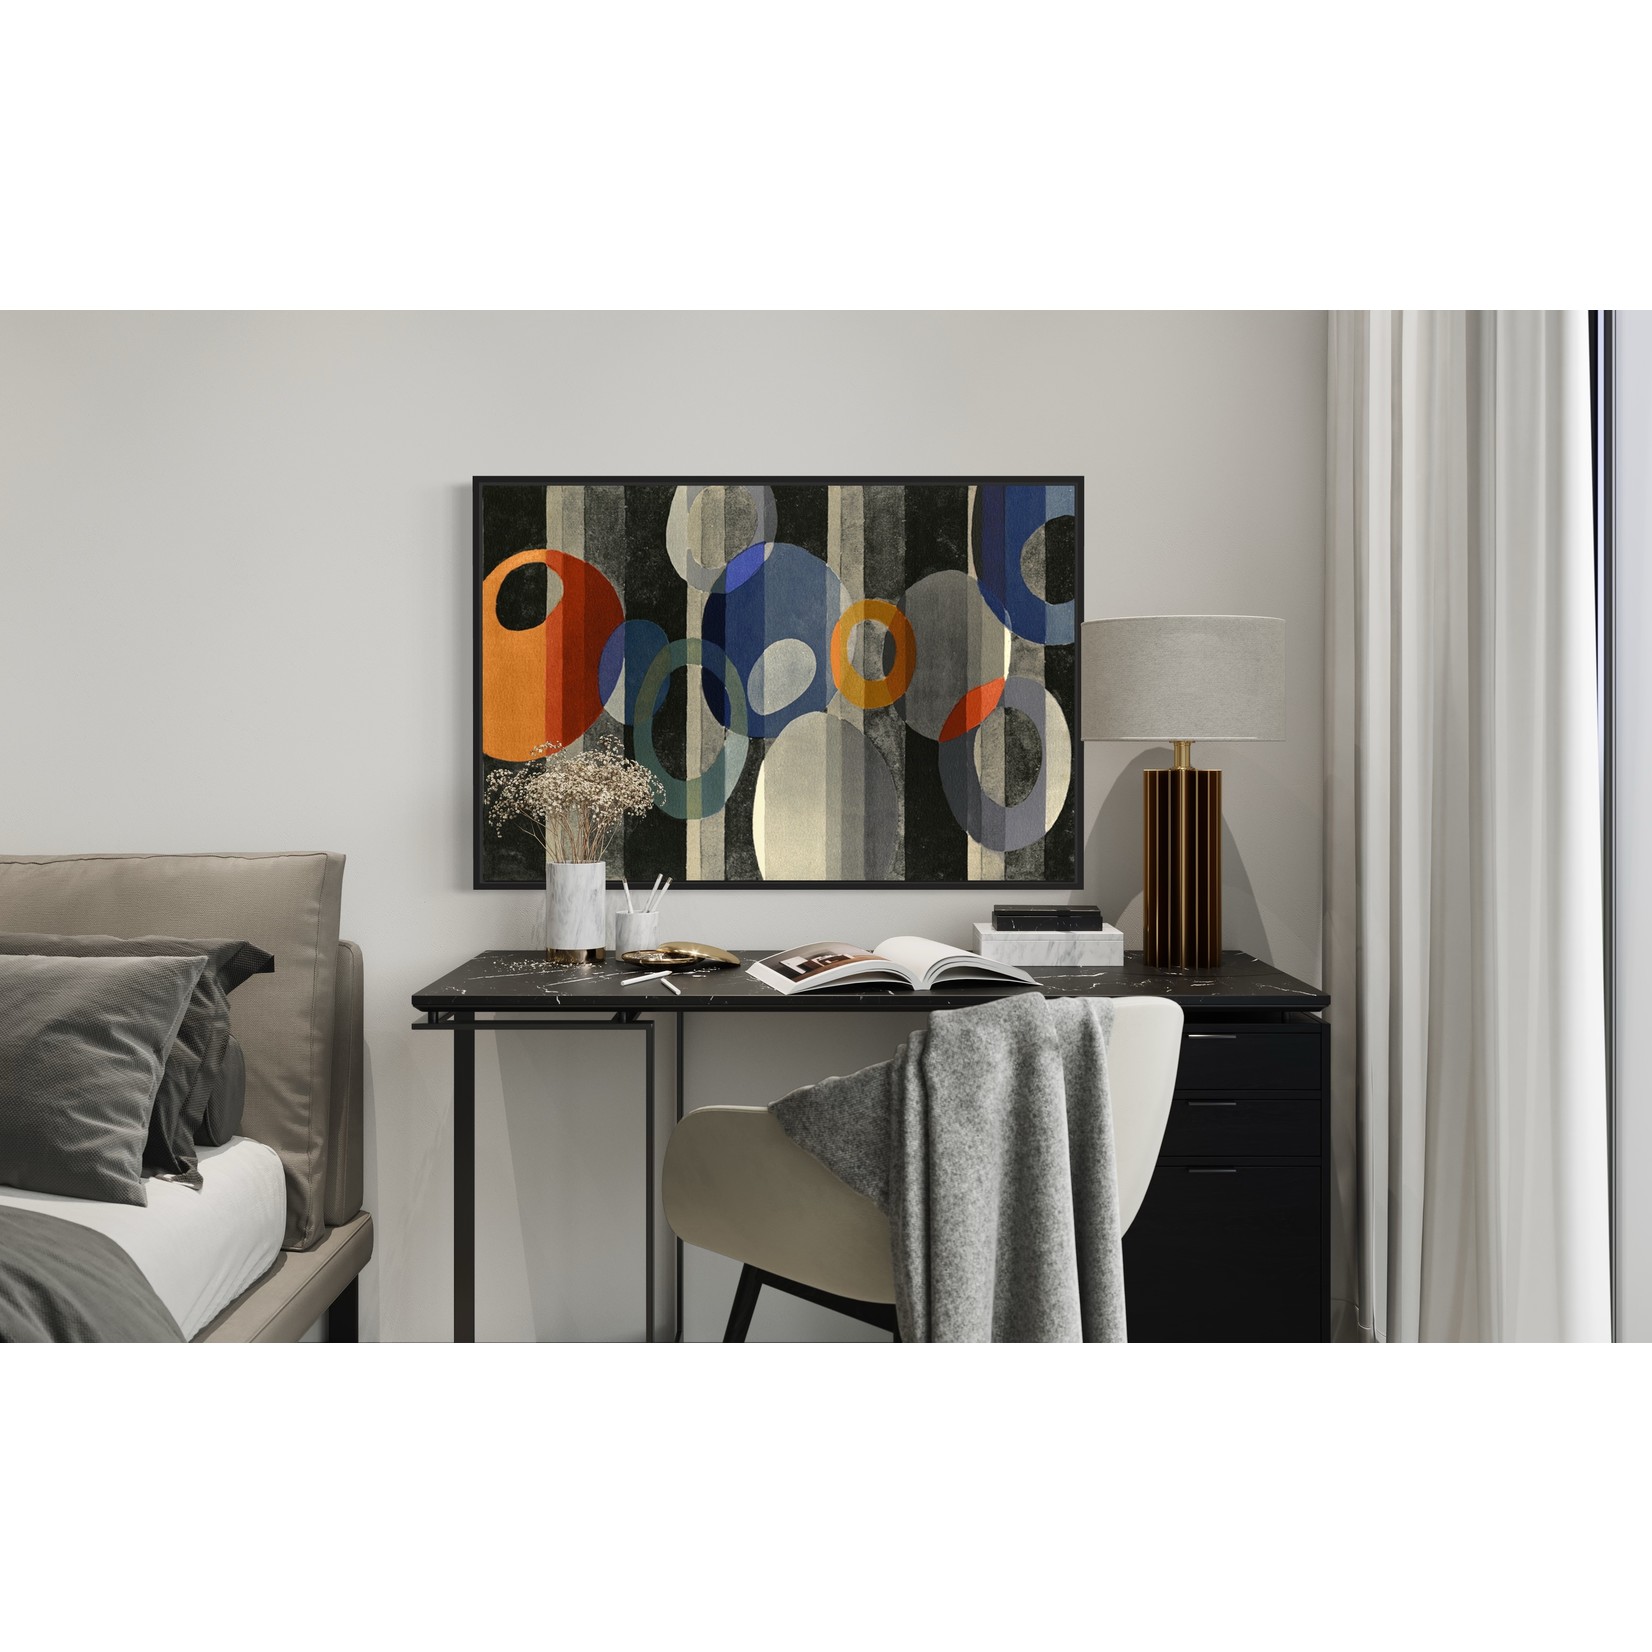 Framed Print on Canvas: Around in Circles by Benedictus